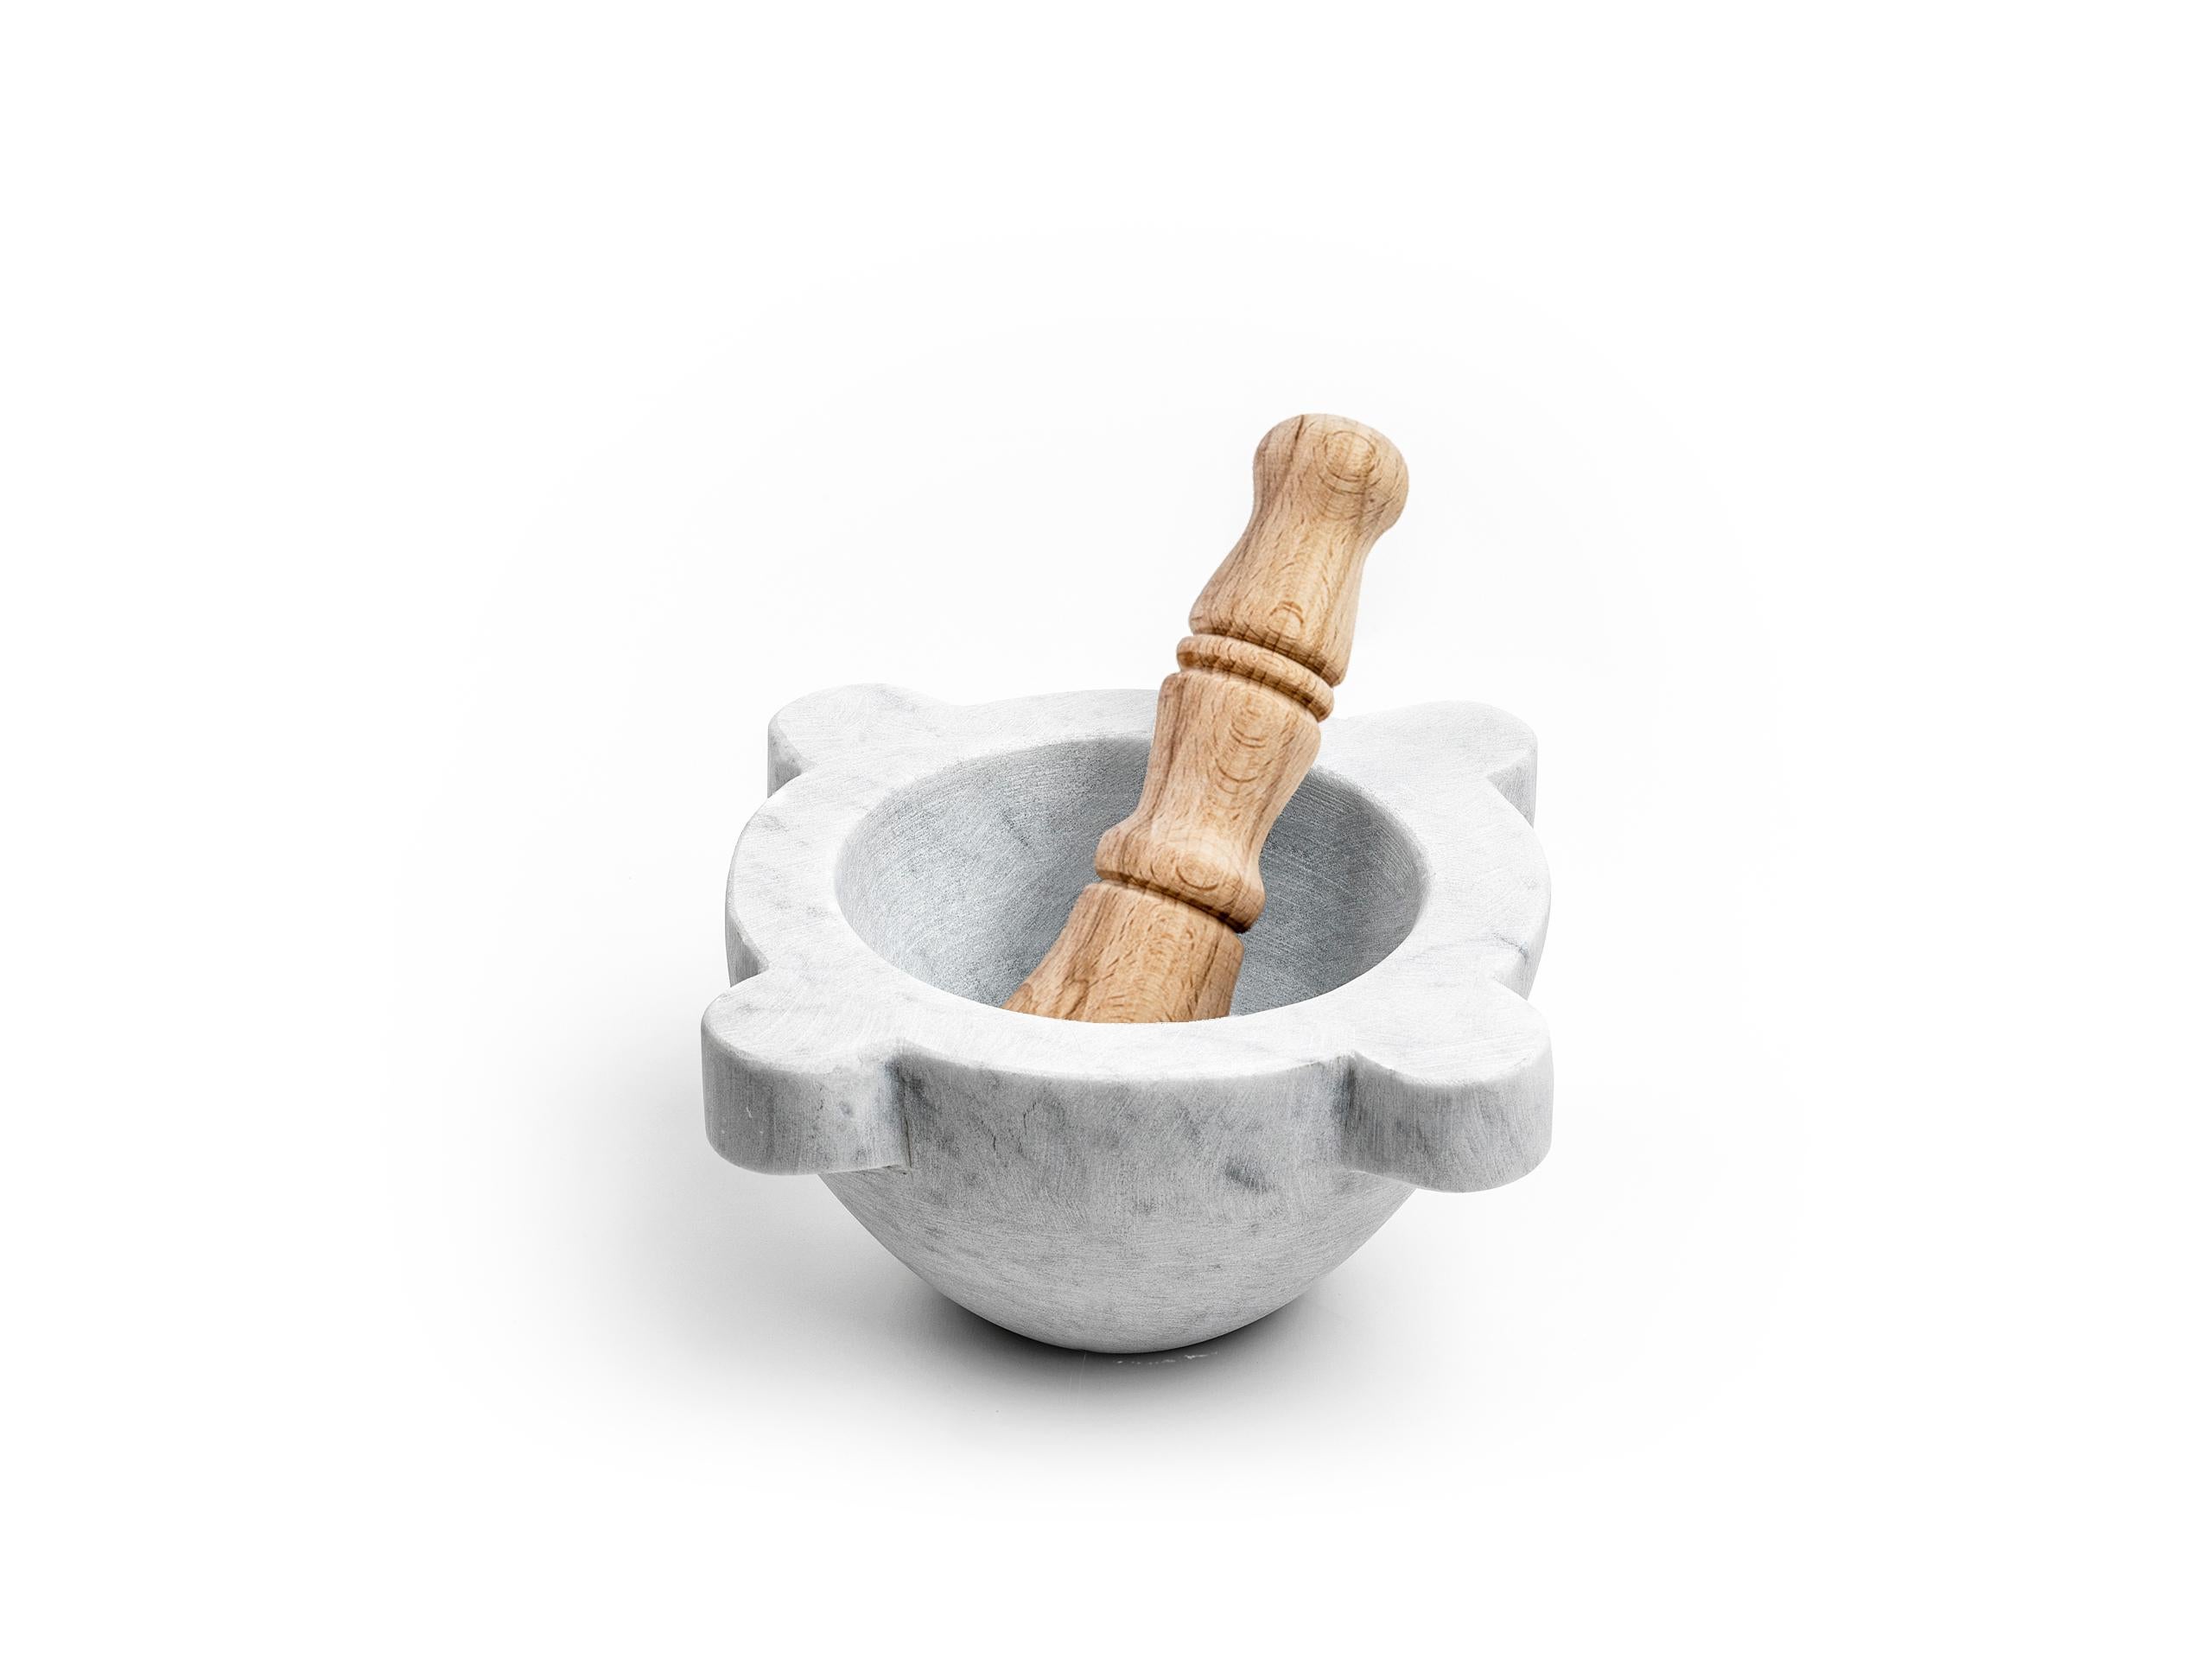 Satin white Carrara marble mortar with pestle in wood. 
The product can not be washed in dishwasher but needs to be cleaned with water or Marseille soap. It is certified for food use. It is a natural stone that tends to stain but this is part of the